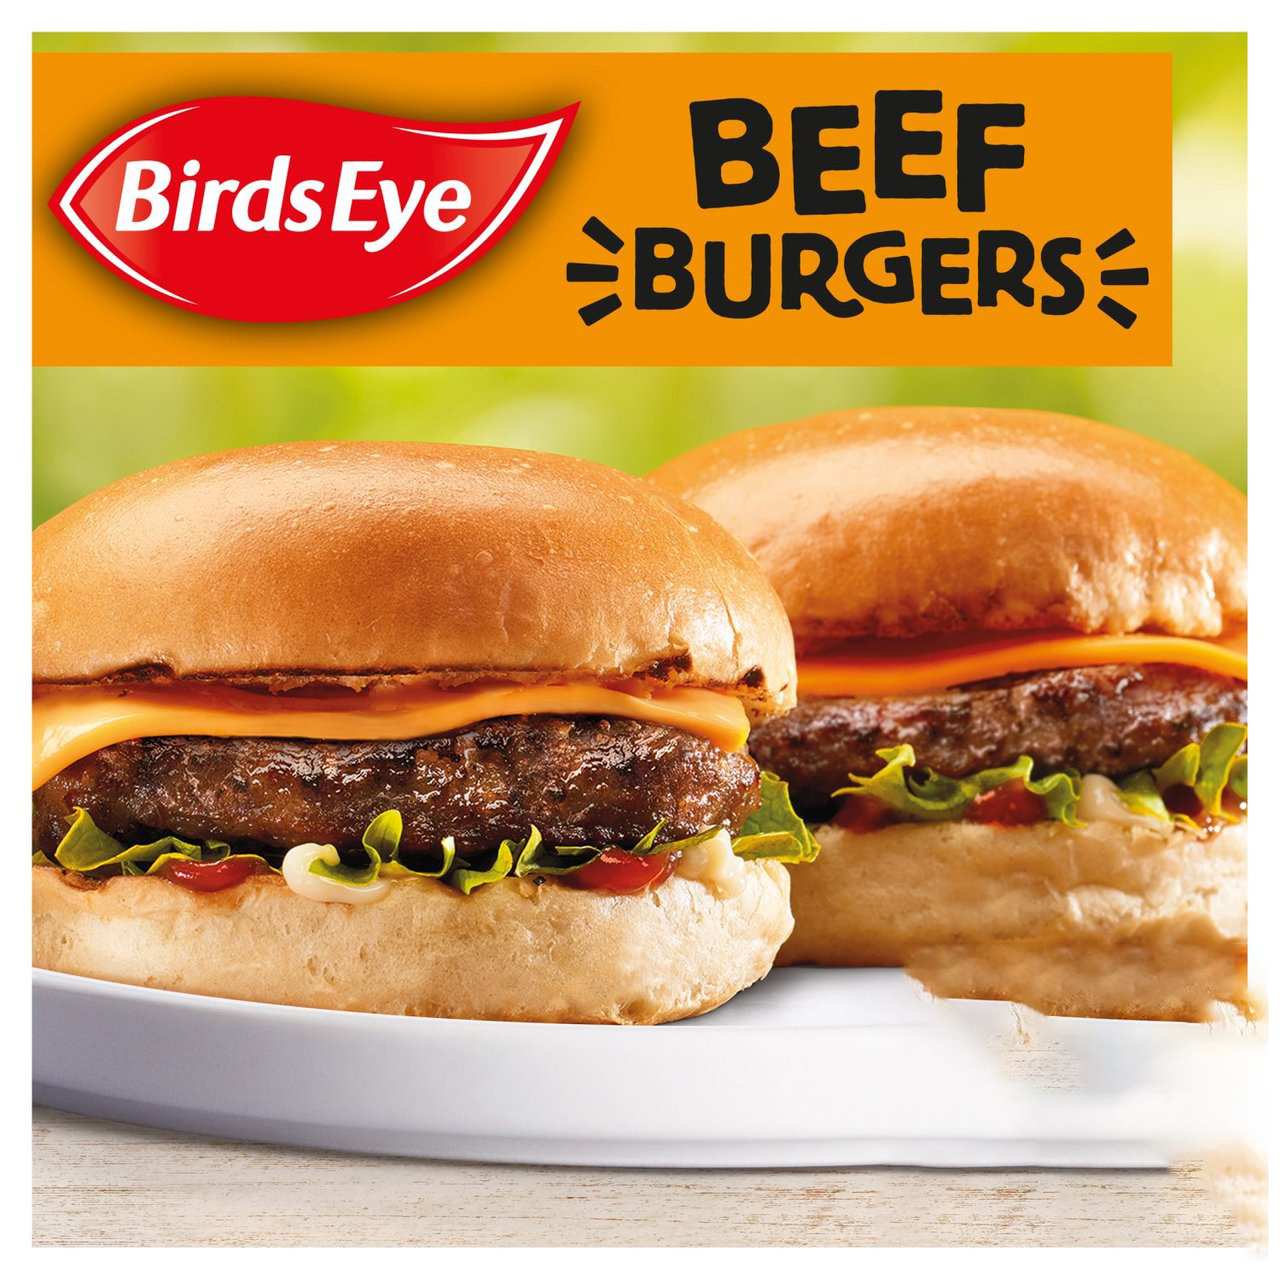 A pack of four Birdseye beef burgers with onions is now £1.50 at Sainsbury’s